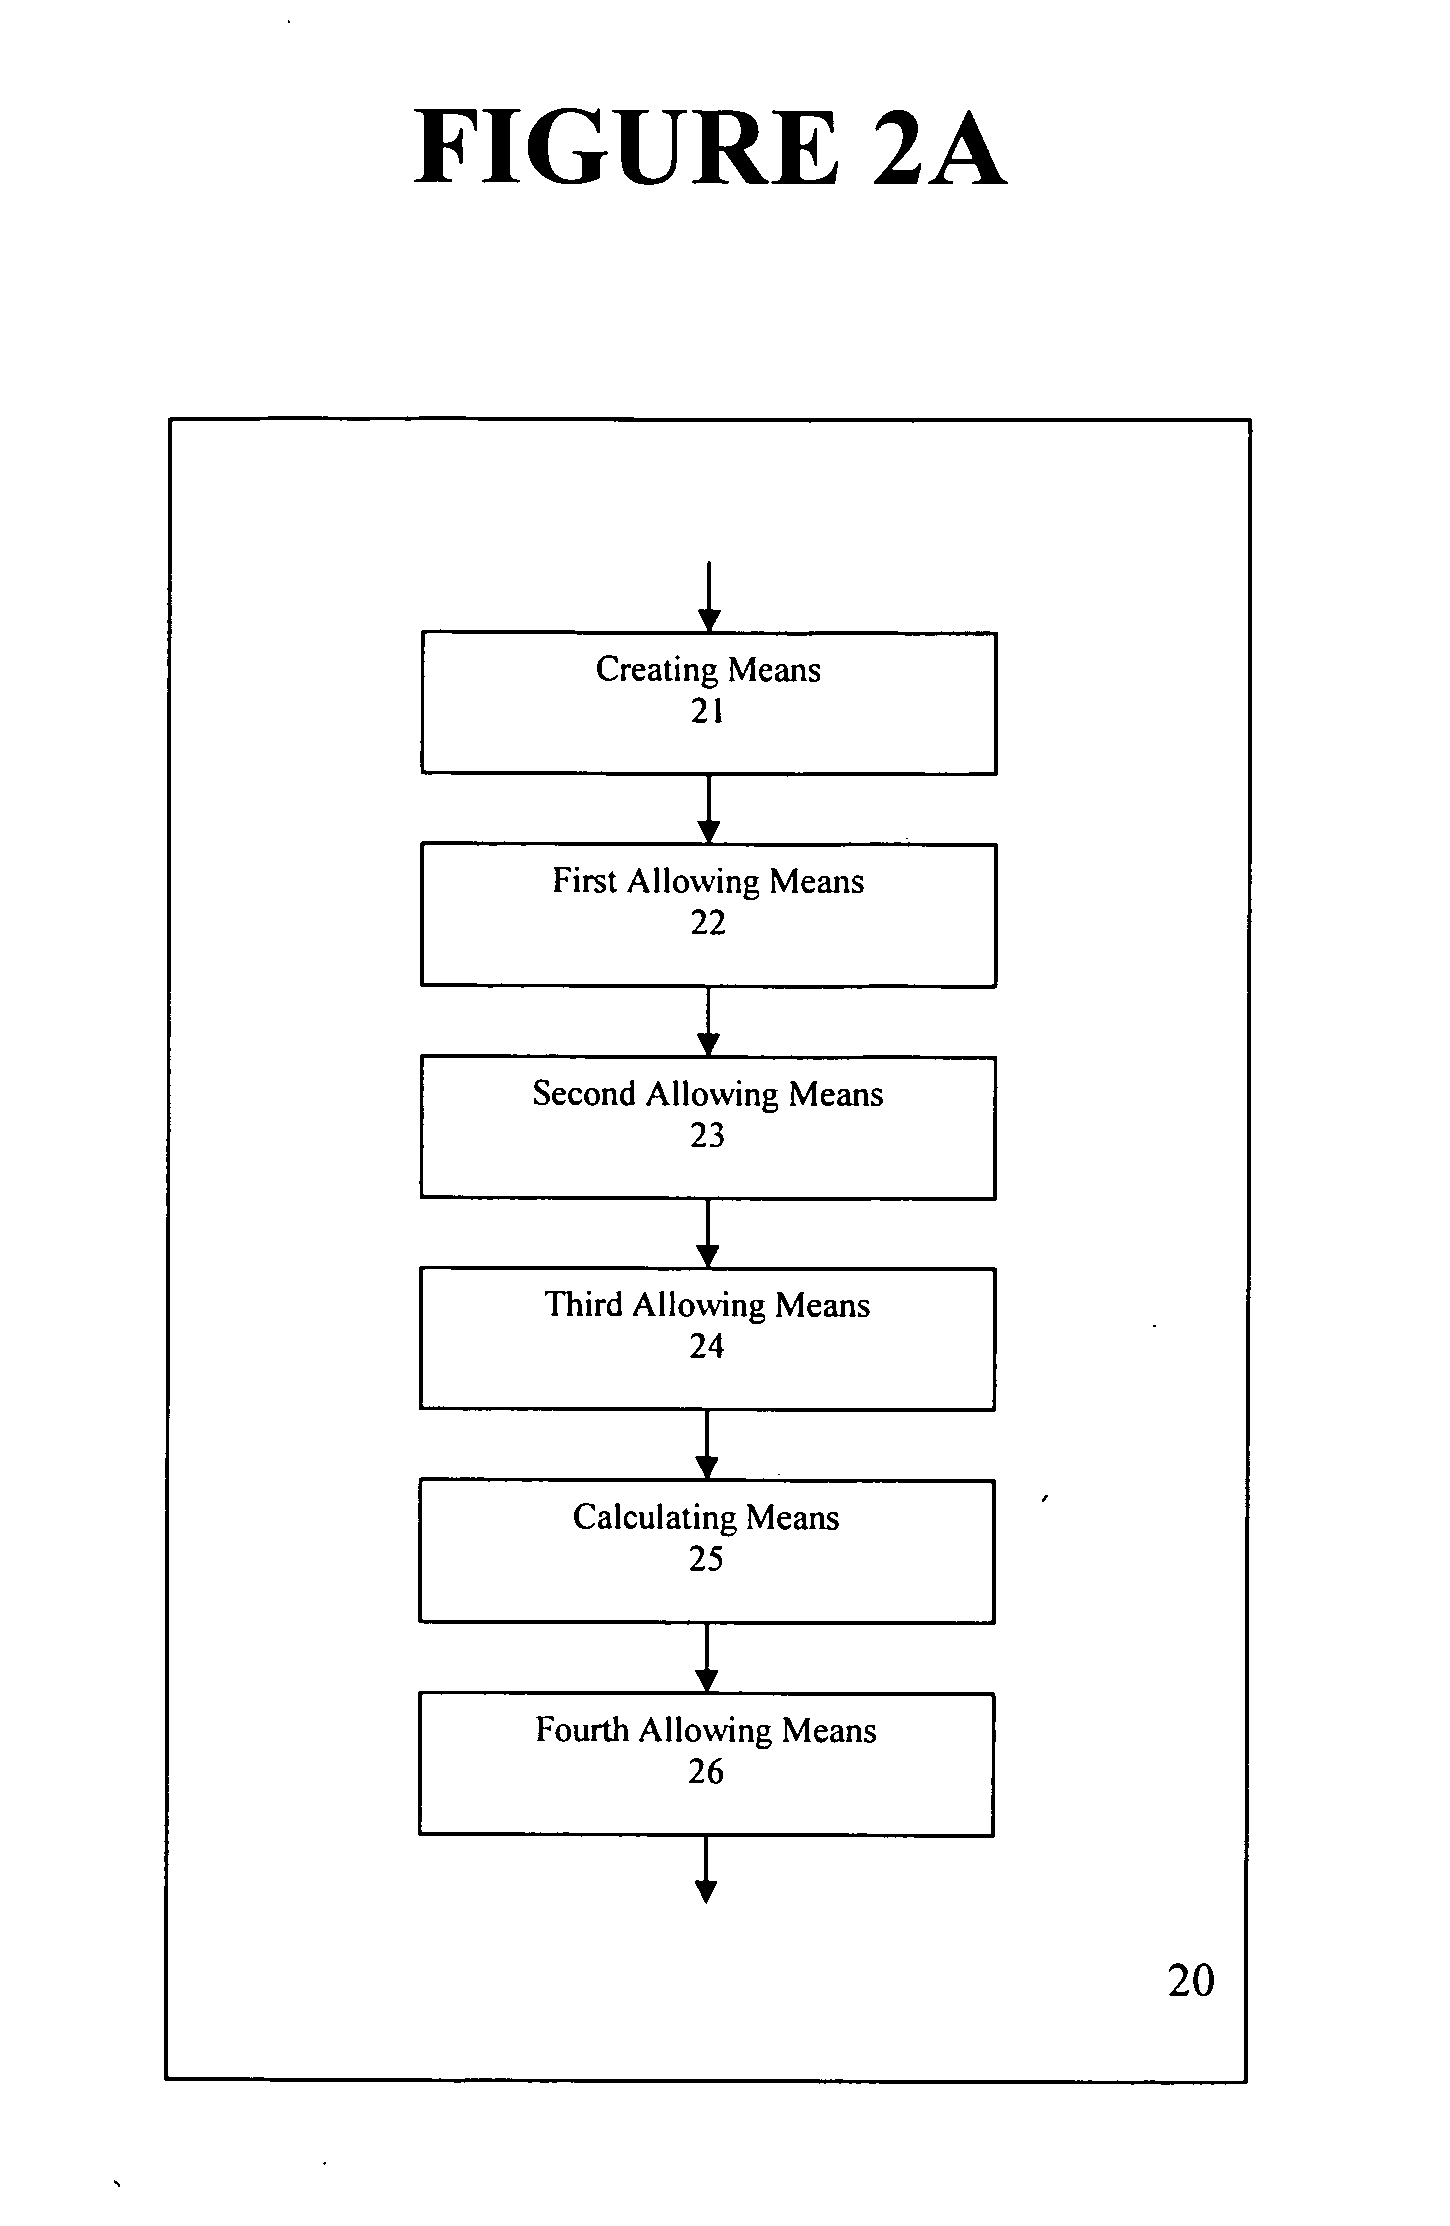 Method and apparatus for collecting and storing information about individuals in a social network